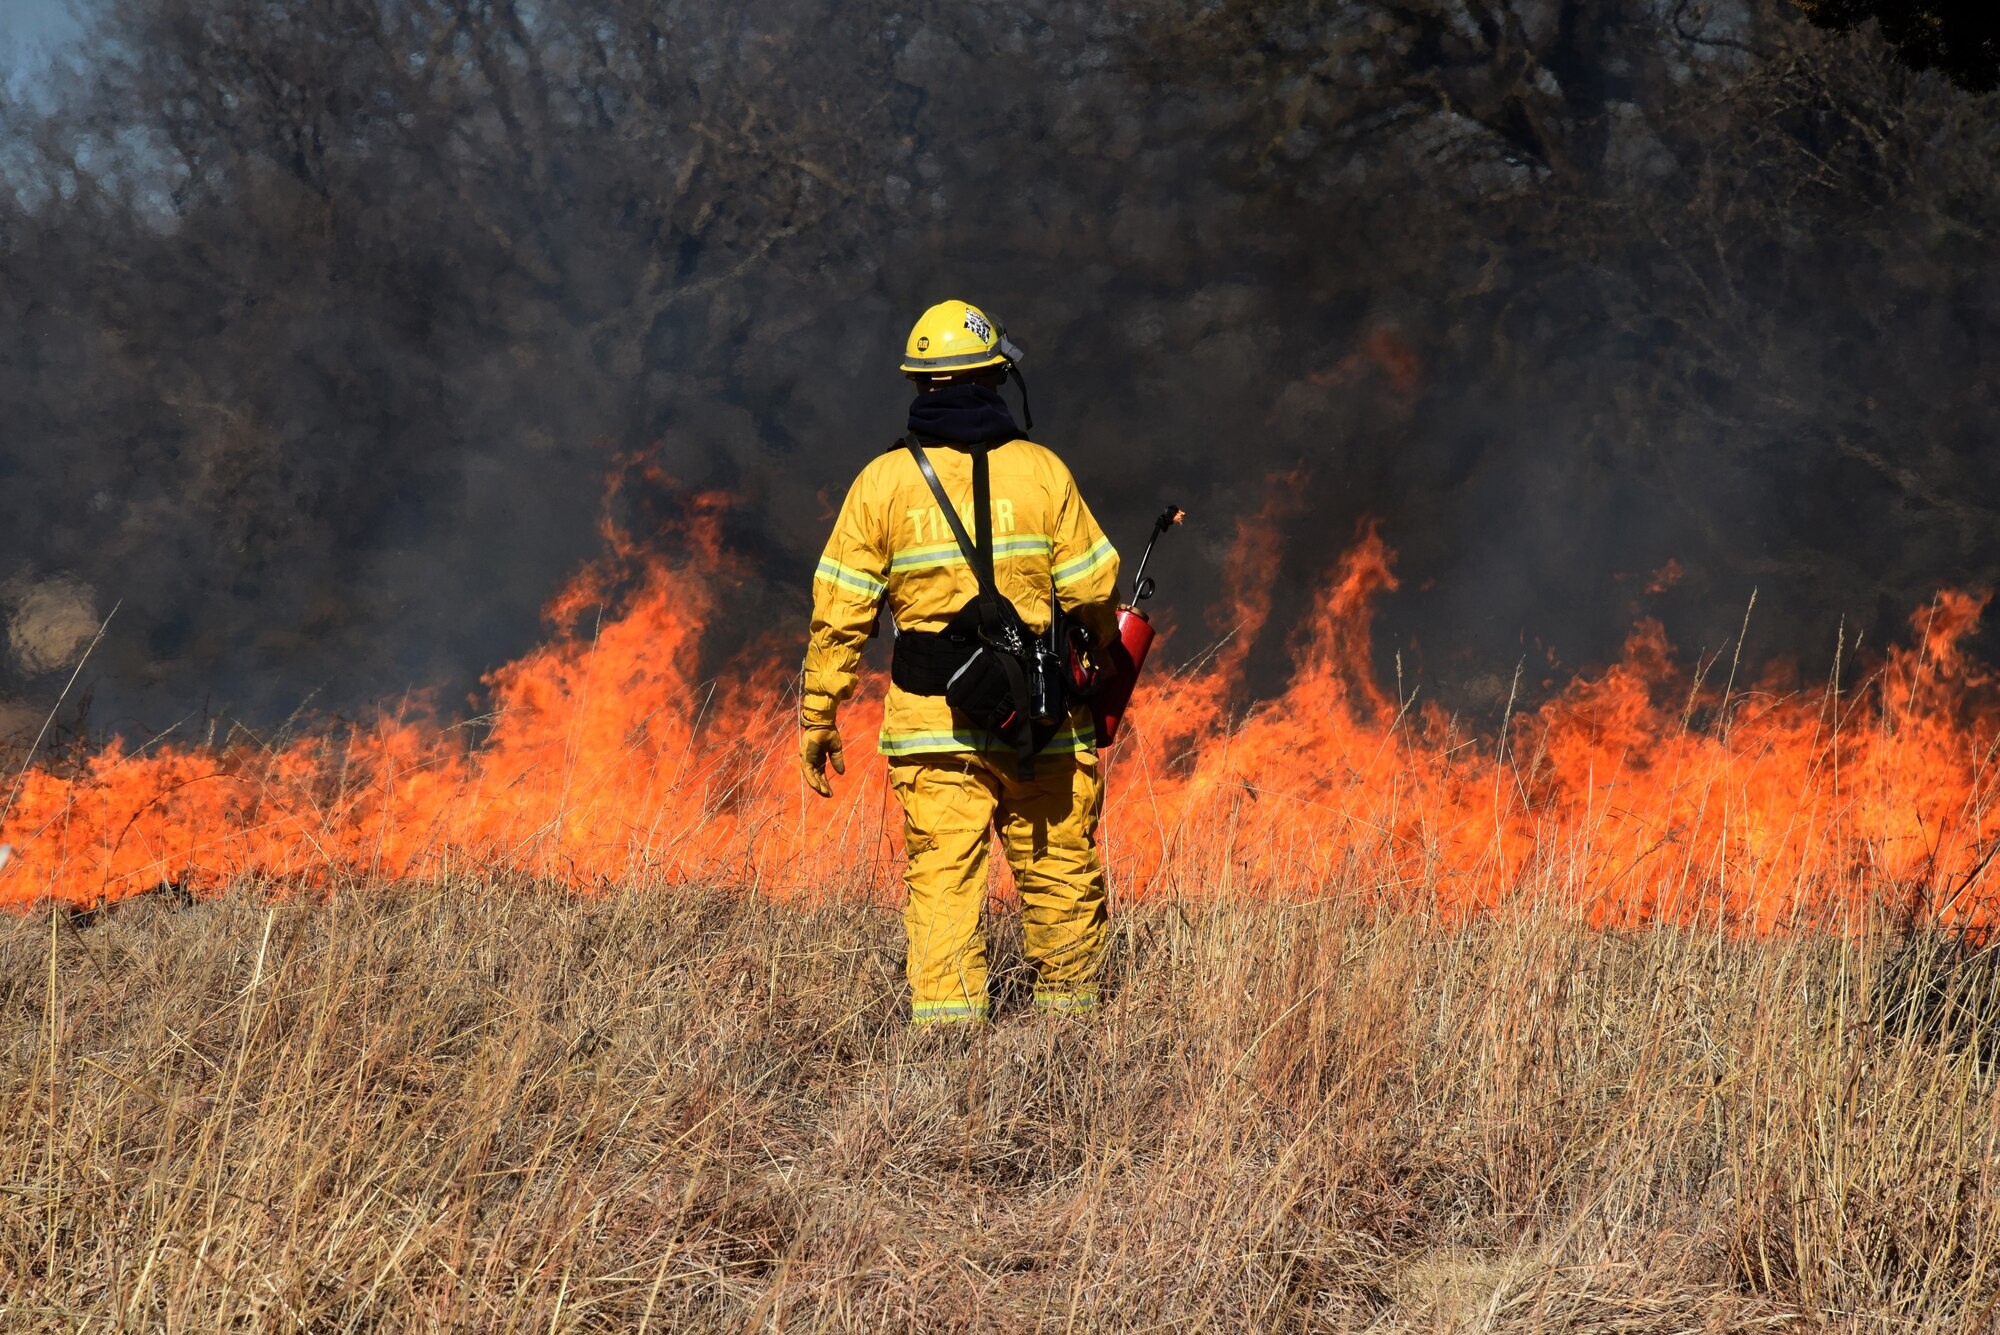 Lt. Michael Beane, with the Tinker Fire Department, carefully watches the flames in a prescribed burn close to base housing, lodging and the Tinker Club Mar. 6. Natural Resources and Tinker Fire Department personnel assisted a team from the Air Force Wildland Fire Branch in the prescribed burn. The burns eliminate invasive and non-native grasses and plants and act as a fertilizer, allowing new, productive growth in the Tinker grassland areas.